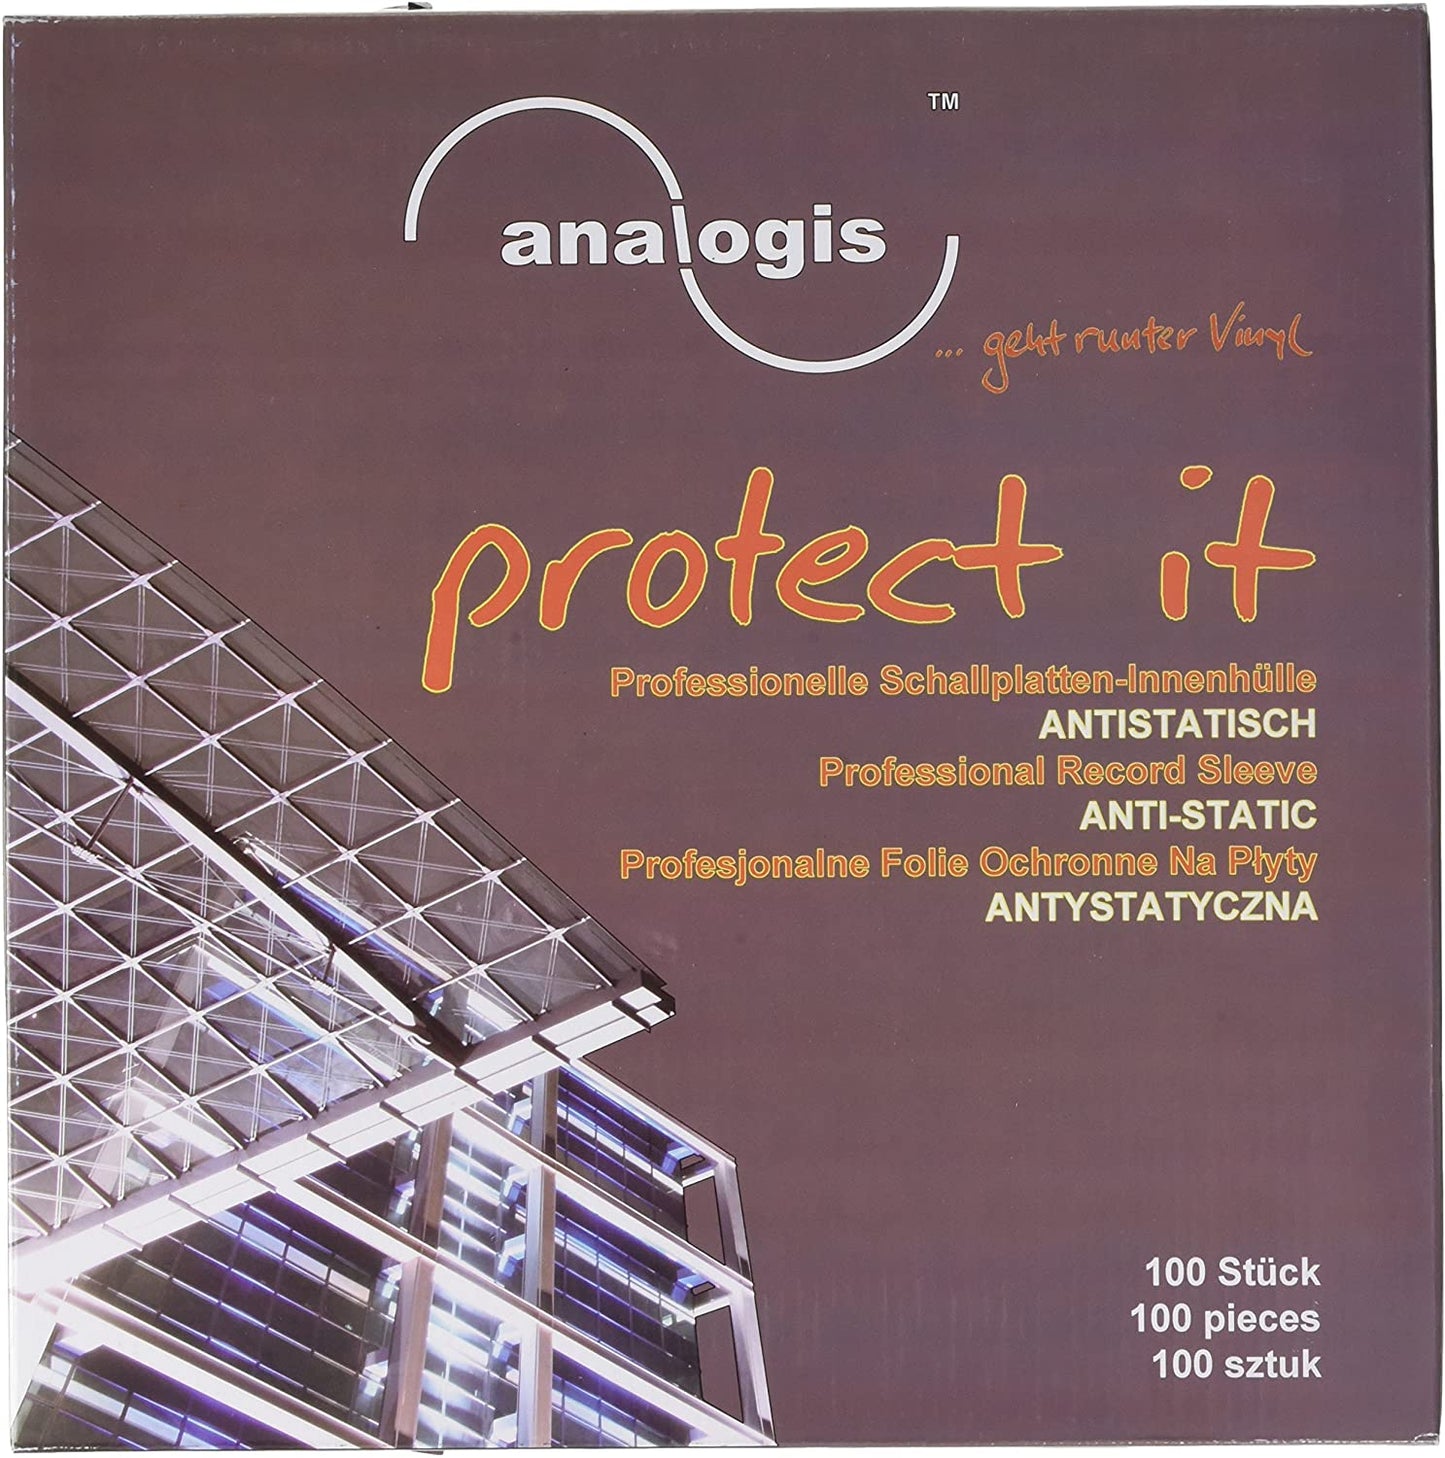 ANALOGIS - TRANSPARENT ANTISTATIC SLEEVES WITH ROUND SIDE FOR RECORDS 33  RPM VINYL 12 INCH (100 pcs.)